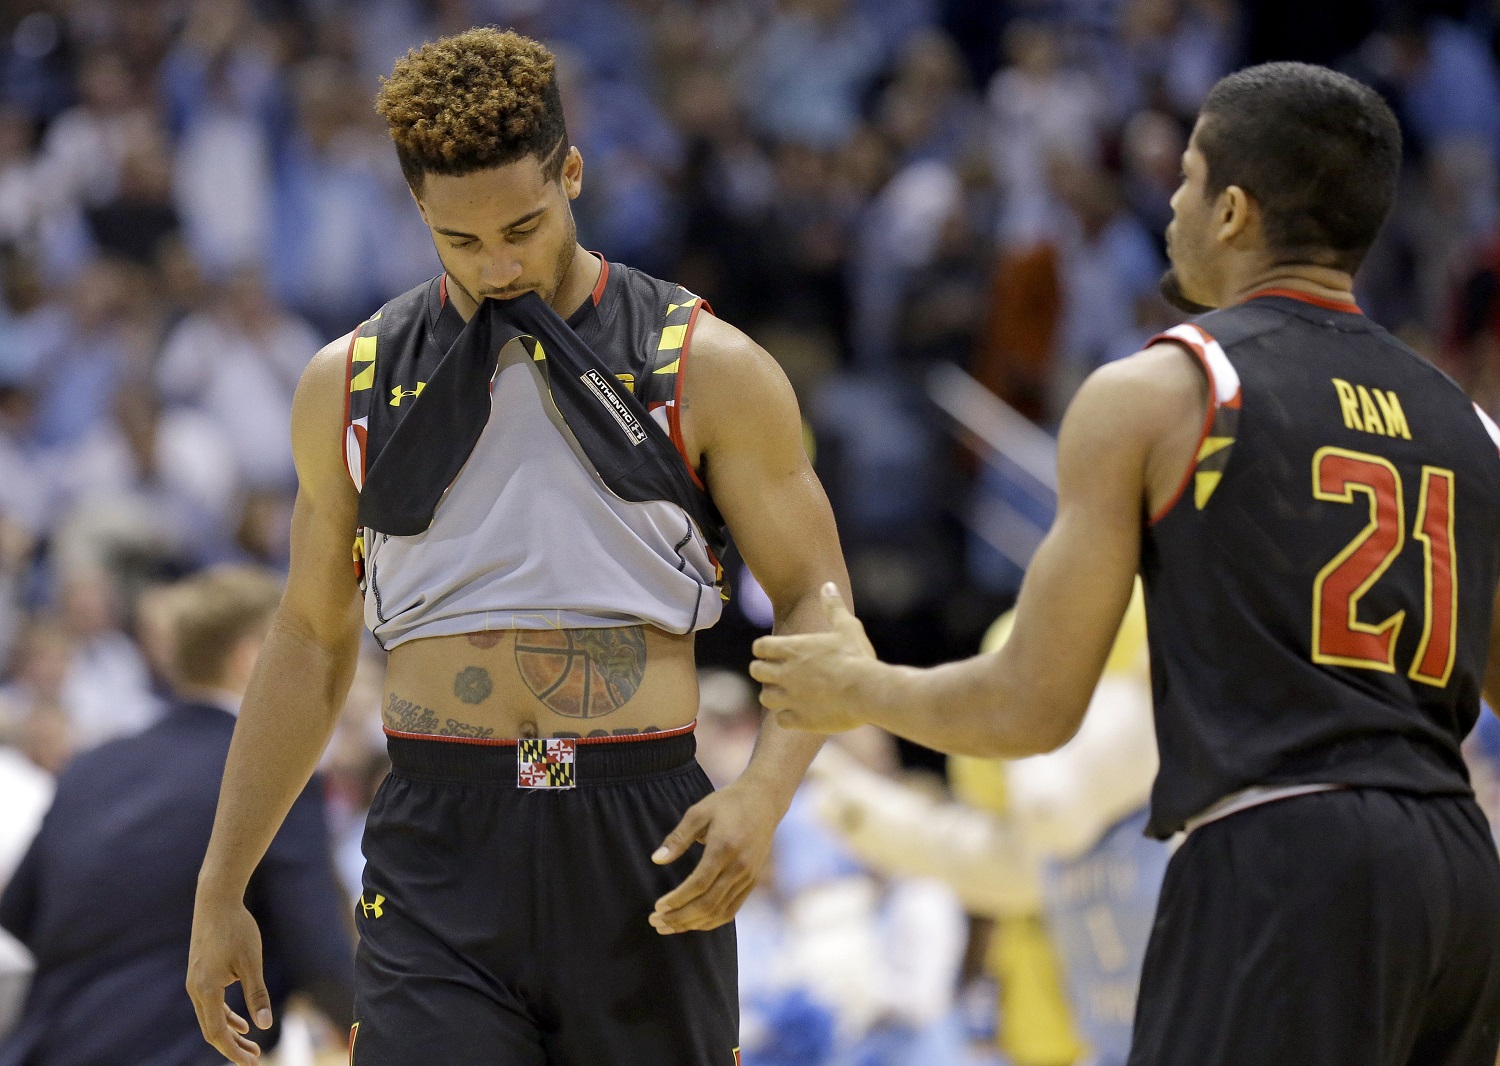 Maryland's Melo Trimble, left, reacts with Varun Ram (21) following the team's 89-81 loss to North Carolina in an NCAA college basketball game in Chapel Hill, N.C., Tuesday, Dec. 1, 2015. (AP Photo/Gerry Broome)